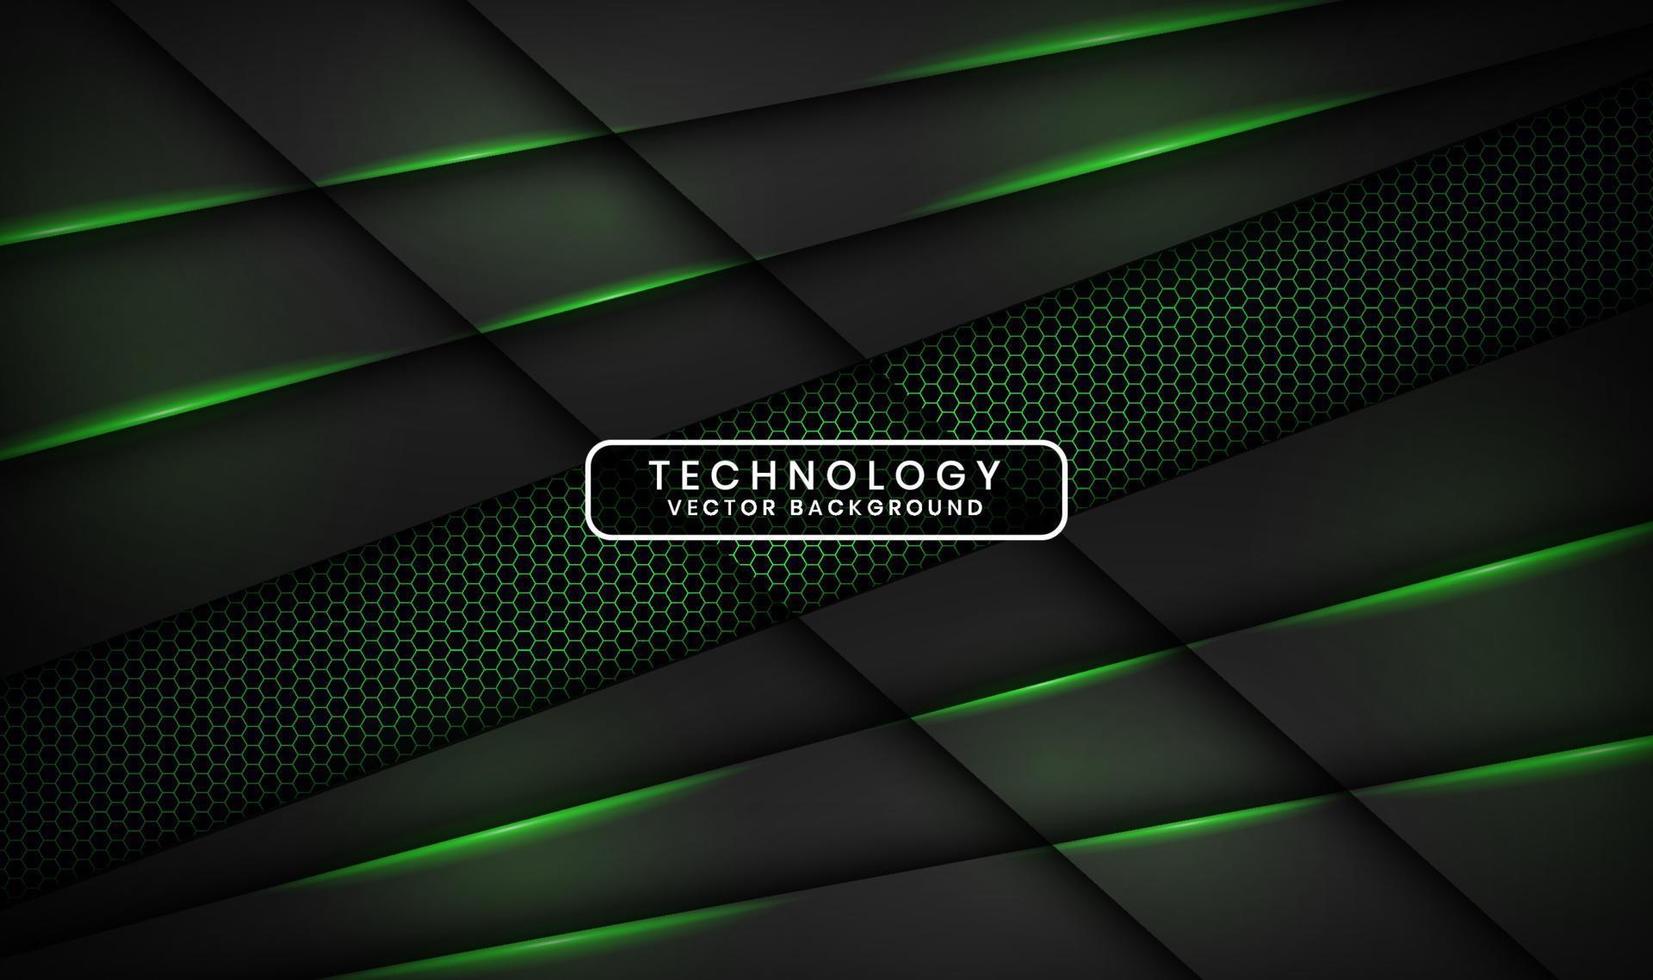 3D black technology abstract background overlap layer on dark space with green light effect decoration. Graphic design element future style concept for banner, flyer, brochure cover, or landing page vector